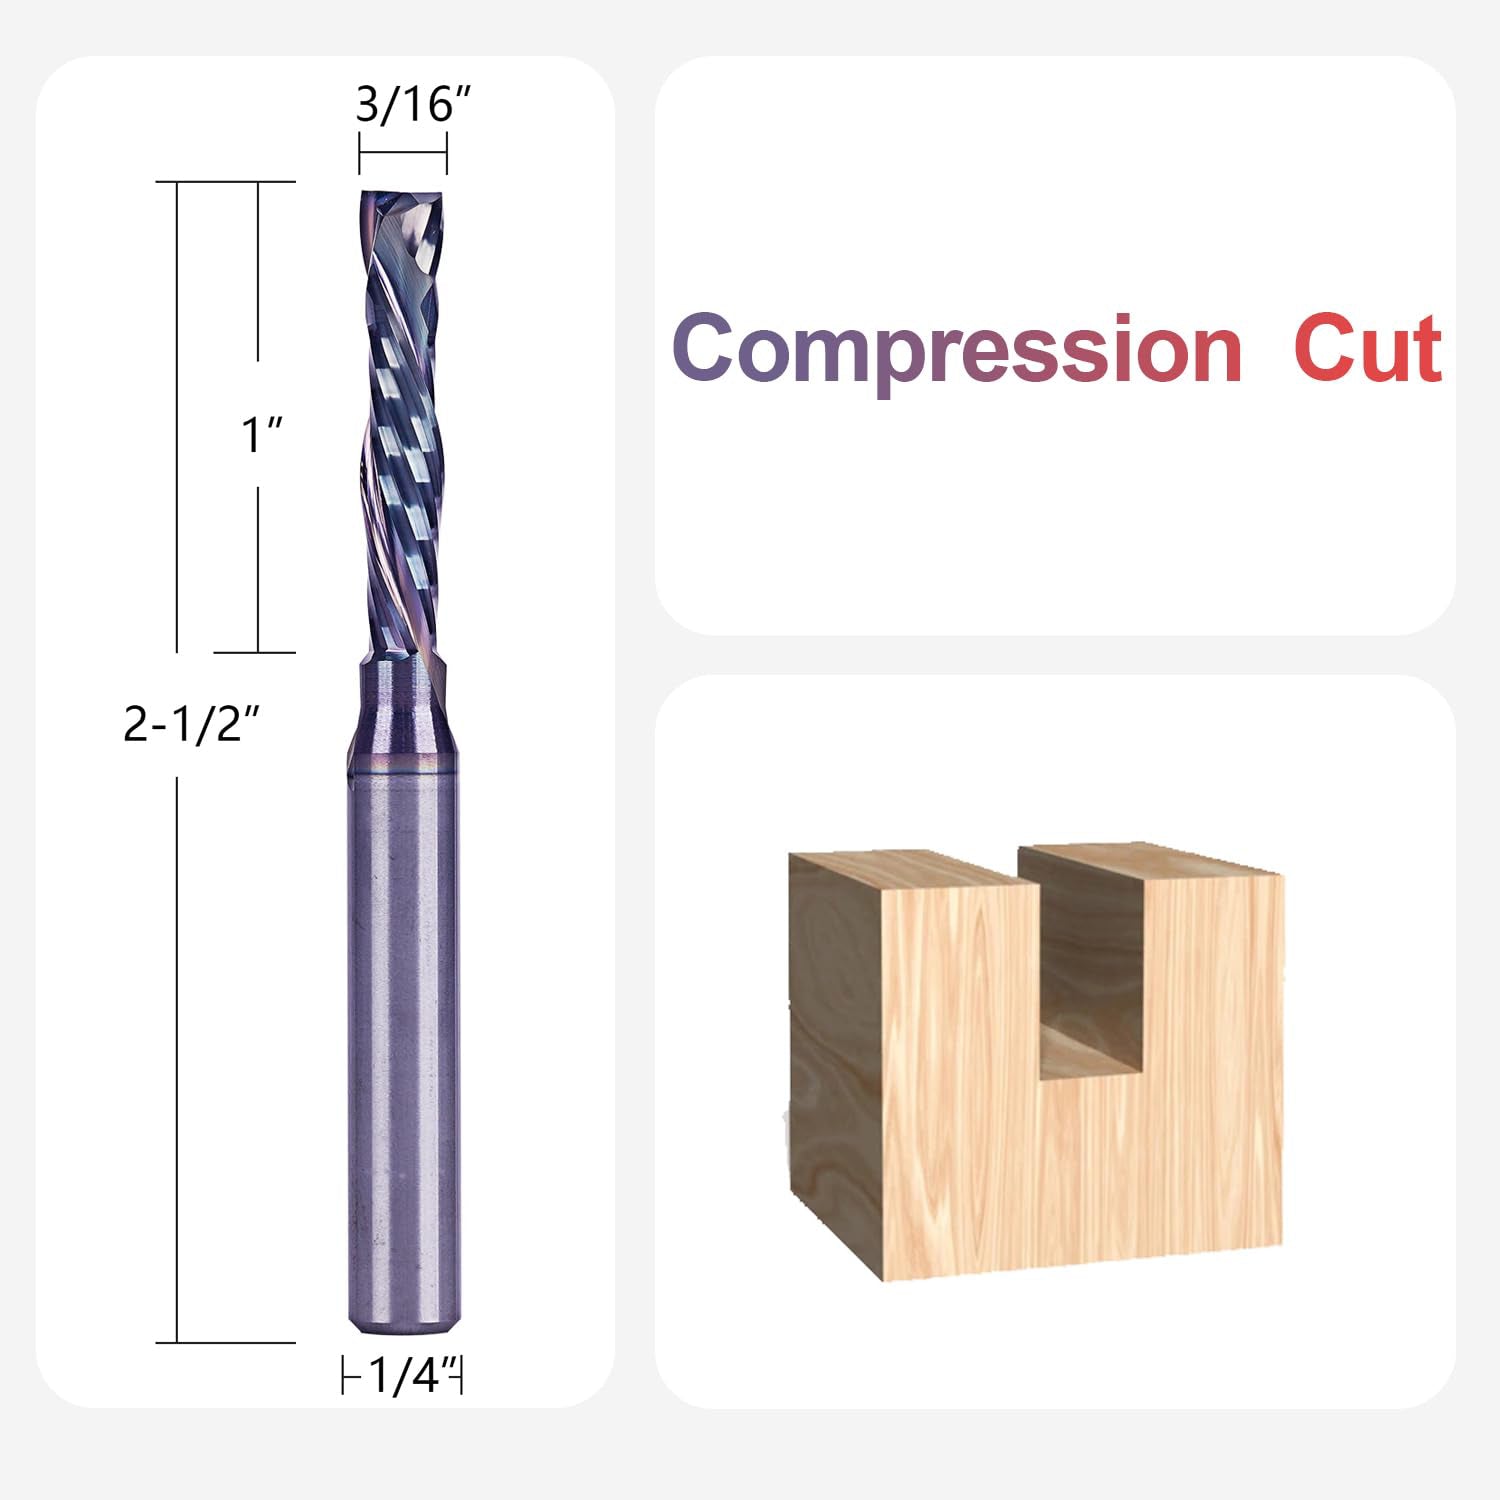 SpeTool Extra Tool Life Compression Spiral 3/16 Dia 1/4 Shank Router bit